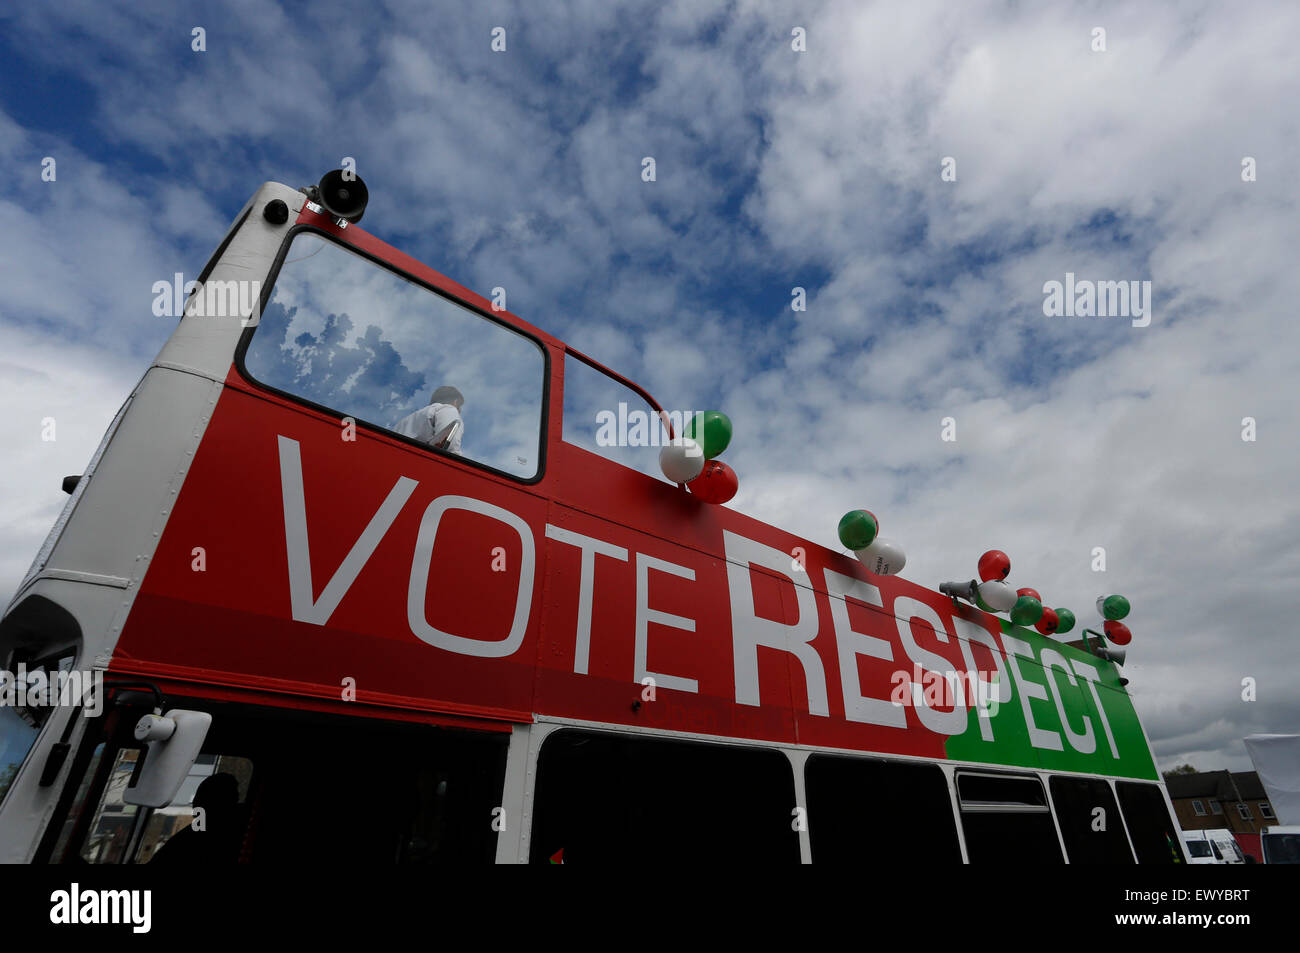 George Galloway's Respect Party bus, on General Election day 2015. Stock Photo